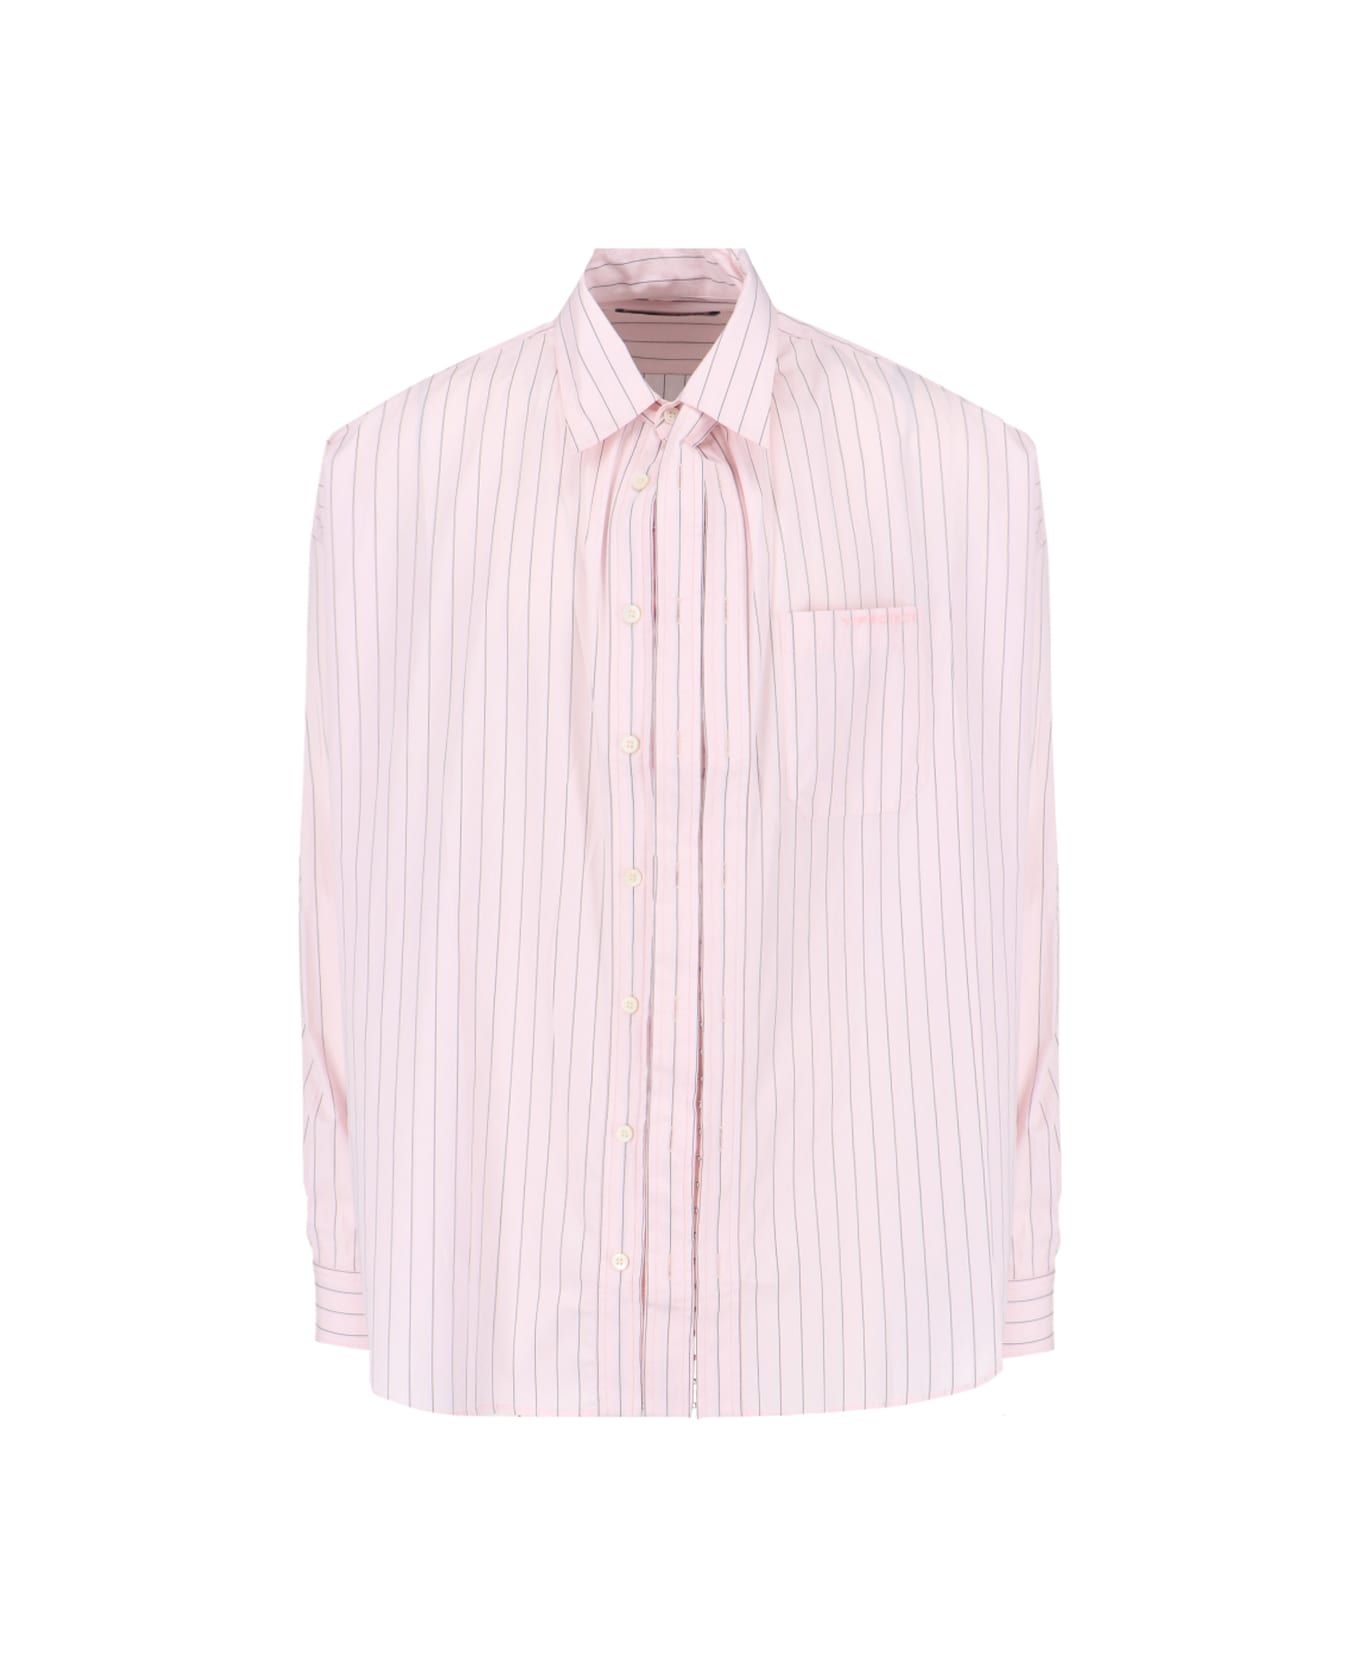 Y/Project Striped Shirt - Pink シャツ